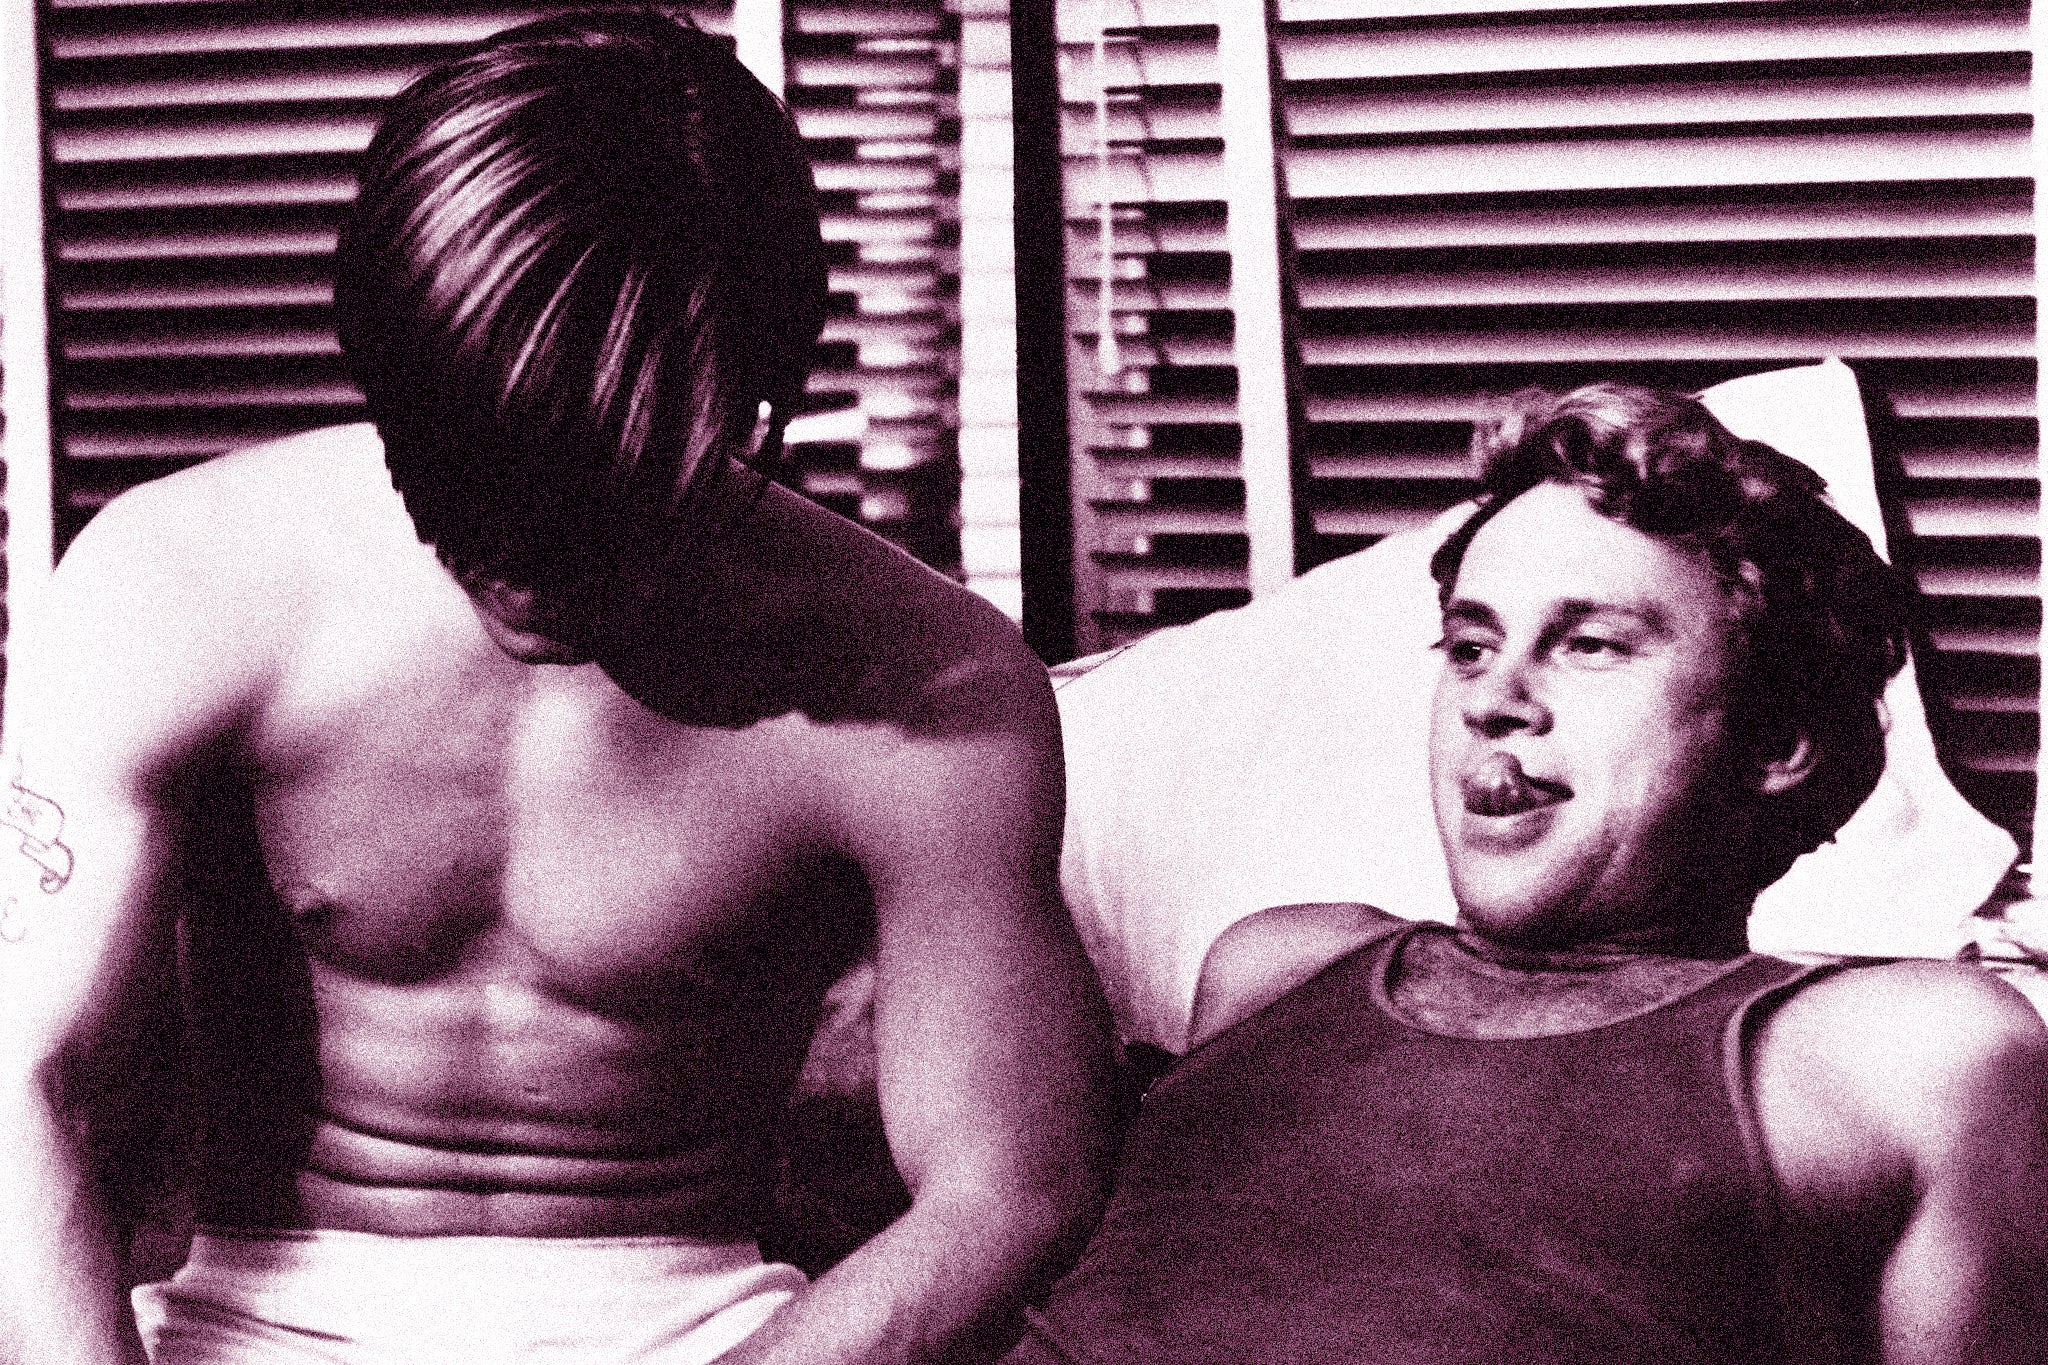 For the cover of The Smiths’ debut album, Morrissey selected a tender shot of actor and gay idol Joe Dallesandro alongside a lusty co-star, taken from Andy Warhol’s 1968 film ‘Flesh’